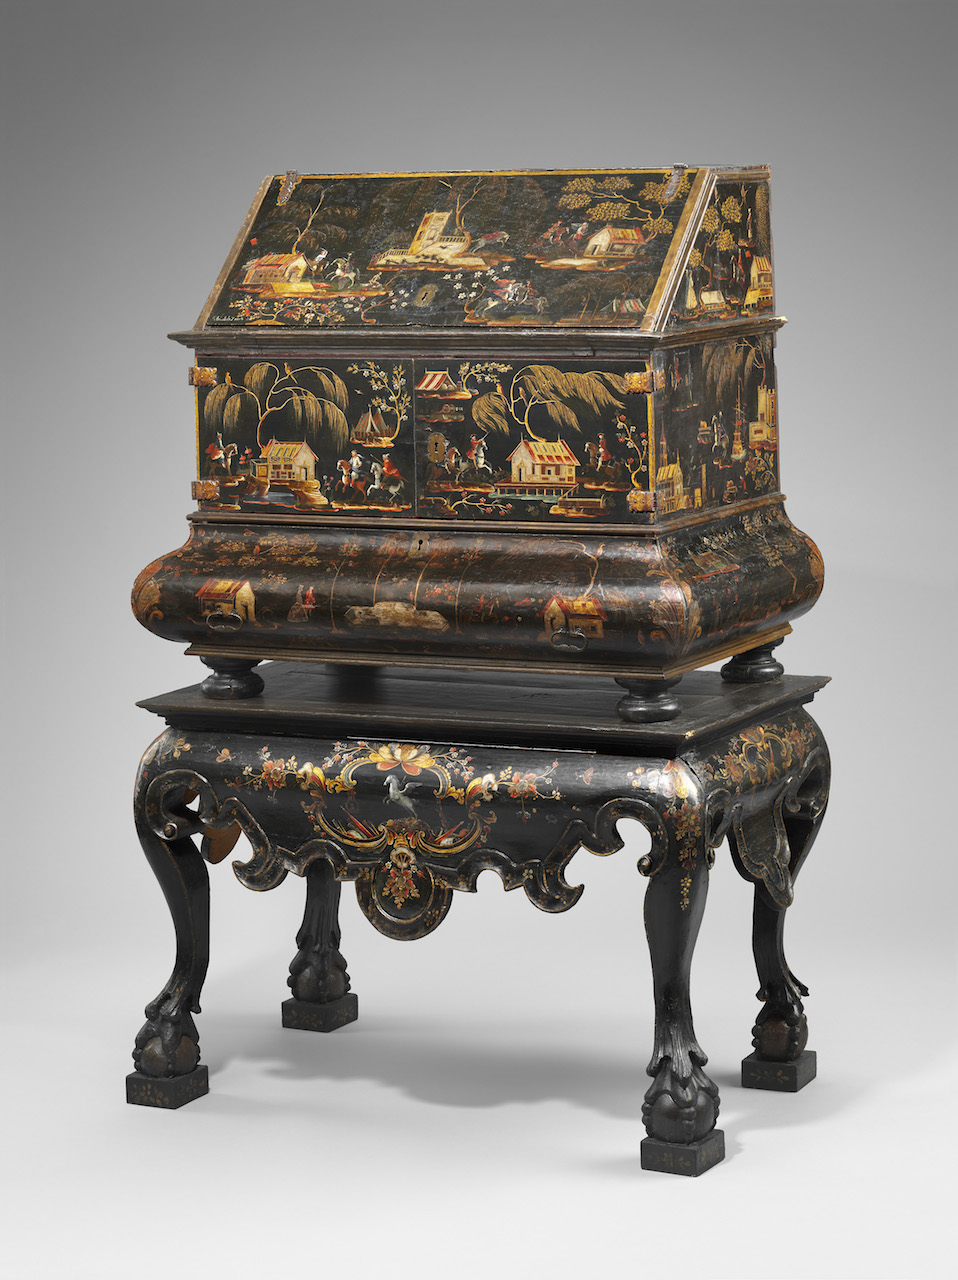 Desk on stand by José Manuel de la Cerda (18th century), lacquered and polychromed wood with painted decoration (on loan from the Hispanic Society of America in NYC, courtesy, Museum of Fine Arts, Boston)